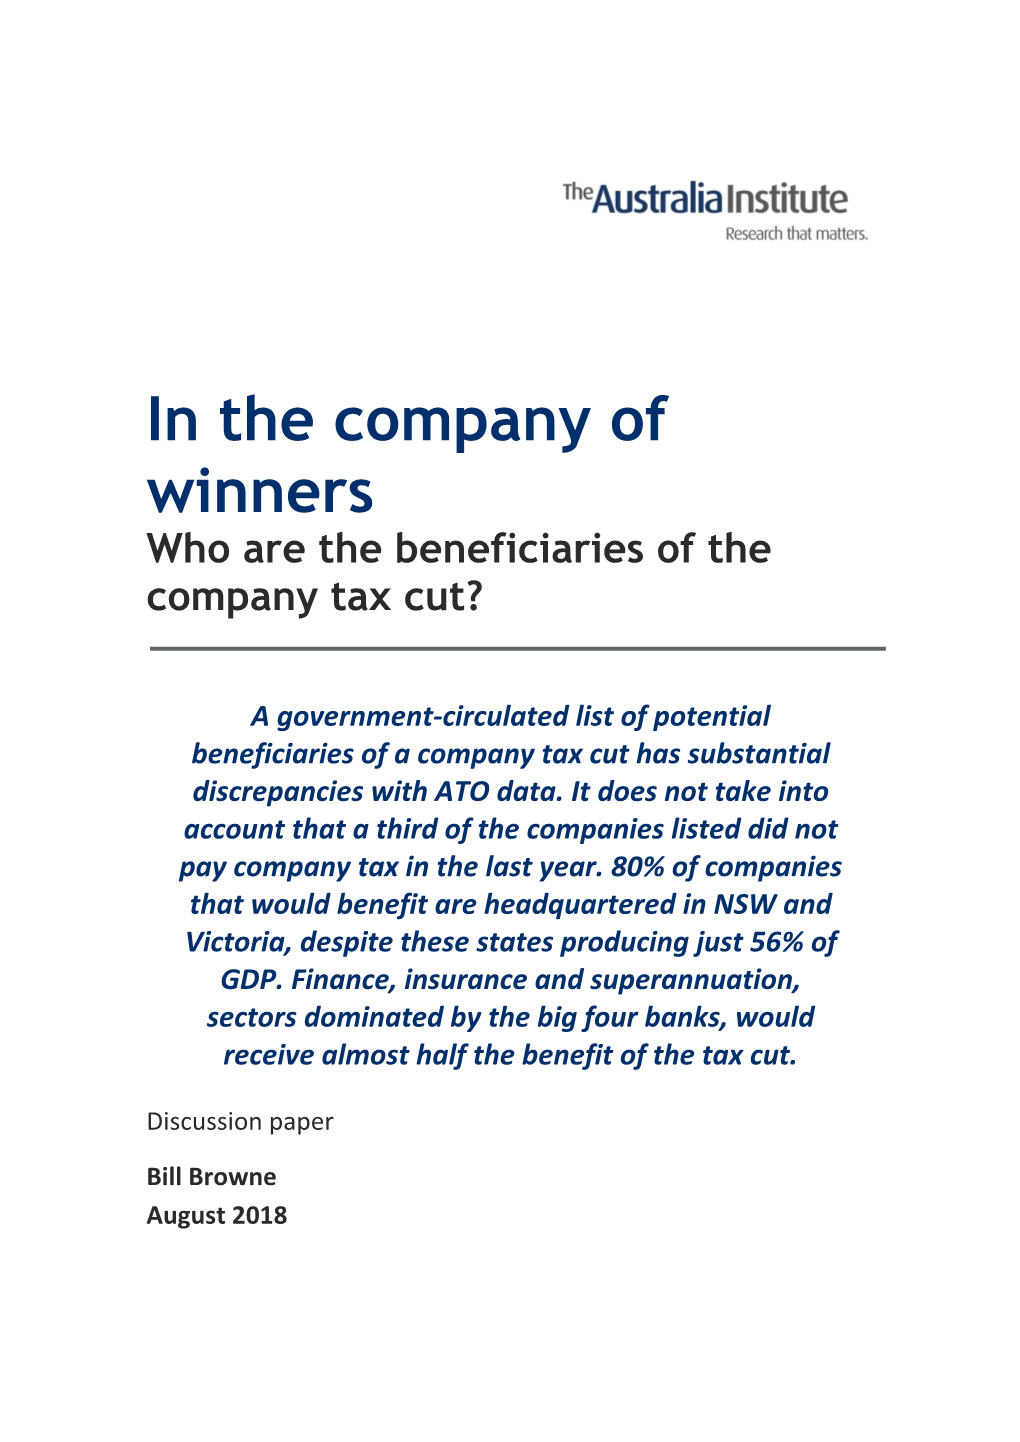 In the Company of Winners Who Are the Beneficiaries of the Company Tax Cut?